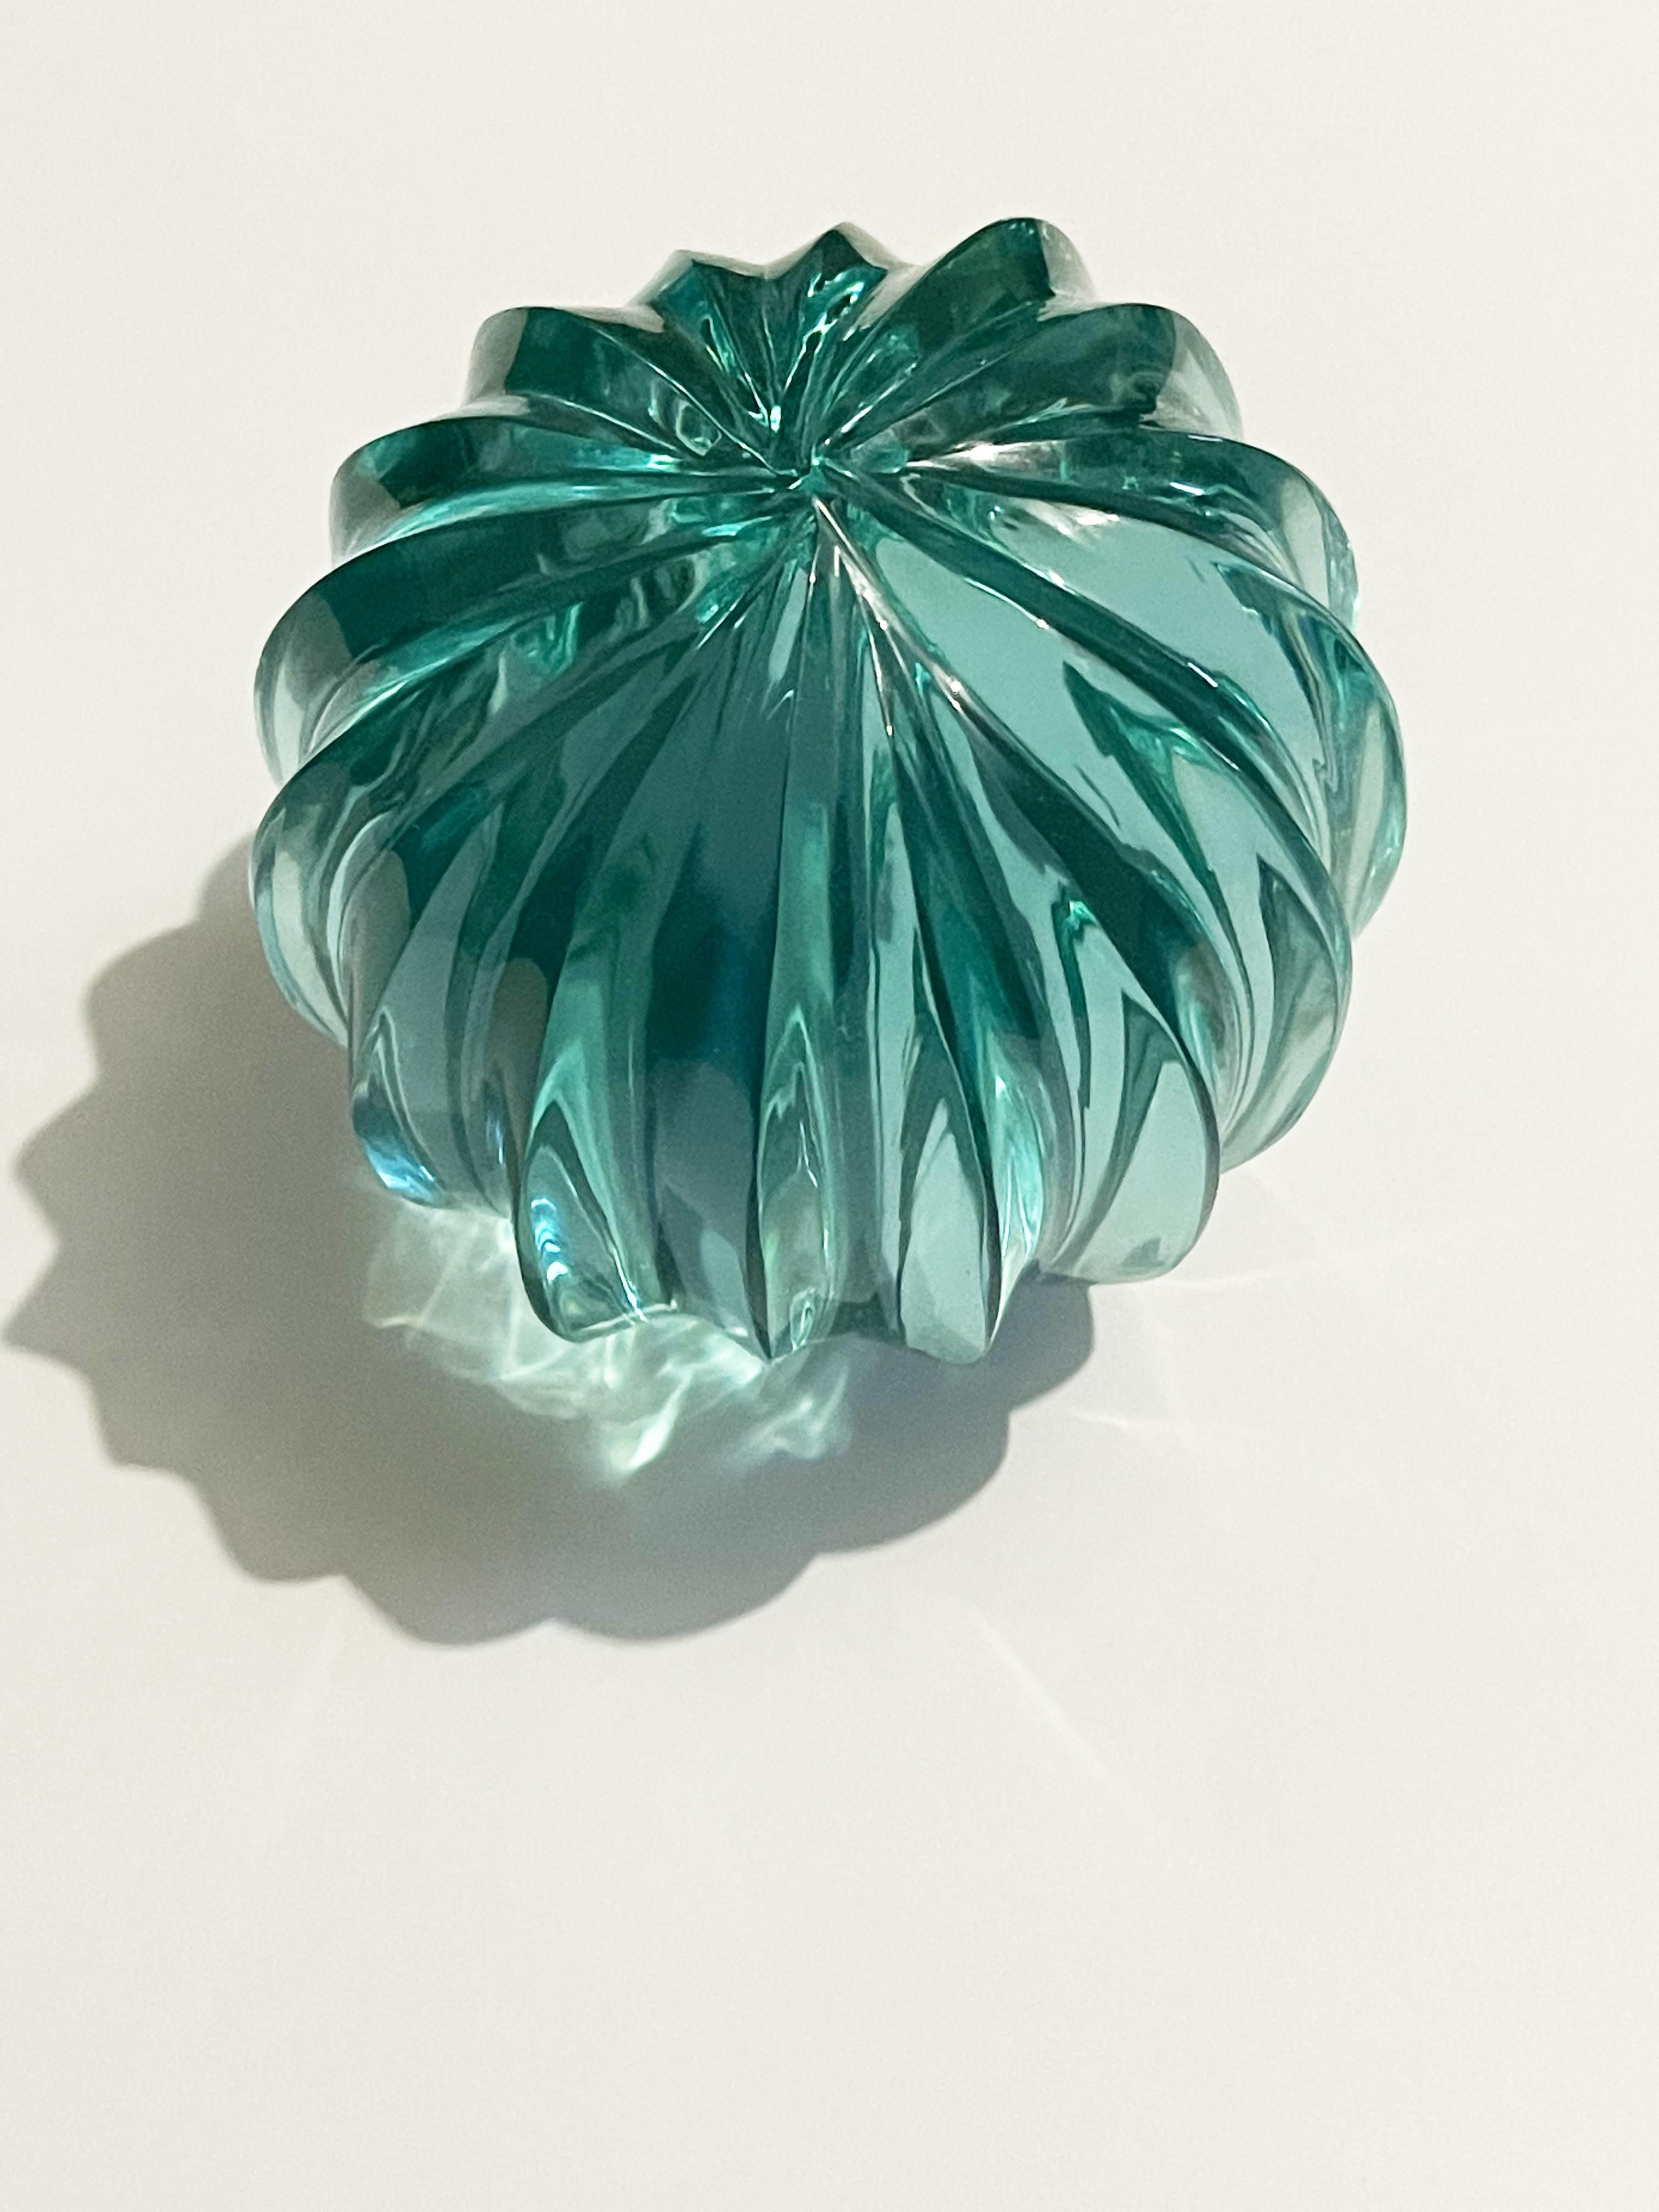 Contemporary Hand-engraved Aquamarine Sculpture by Ghirò Studio In New Condition For Sale In Pieve Emanuele, Milano